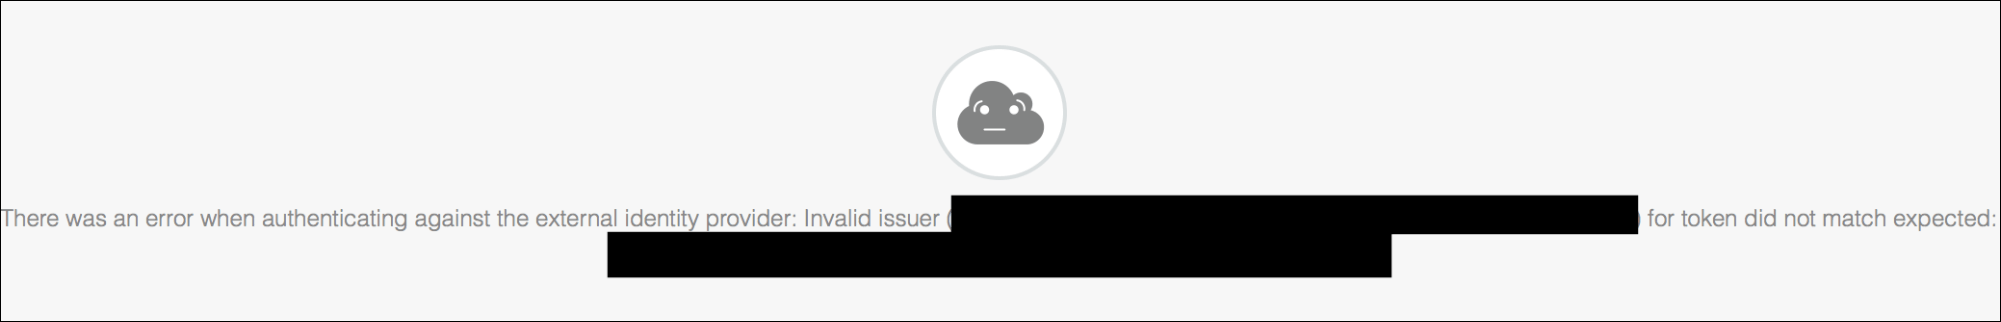 The partially redacted
error message page reads, There was an error when authenticating against
the external identity provider: Invalid issuer (redacted) for token did not match expected (redacted).